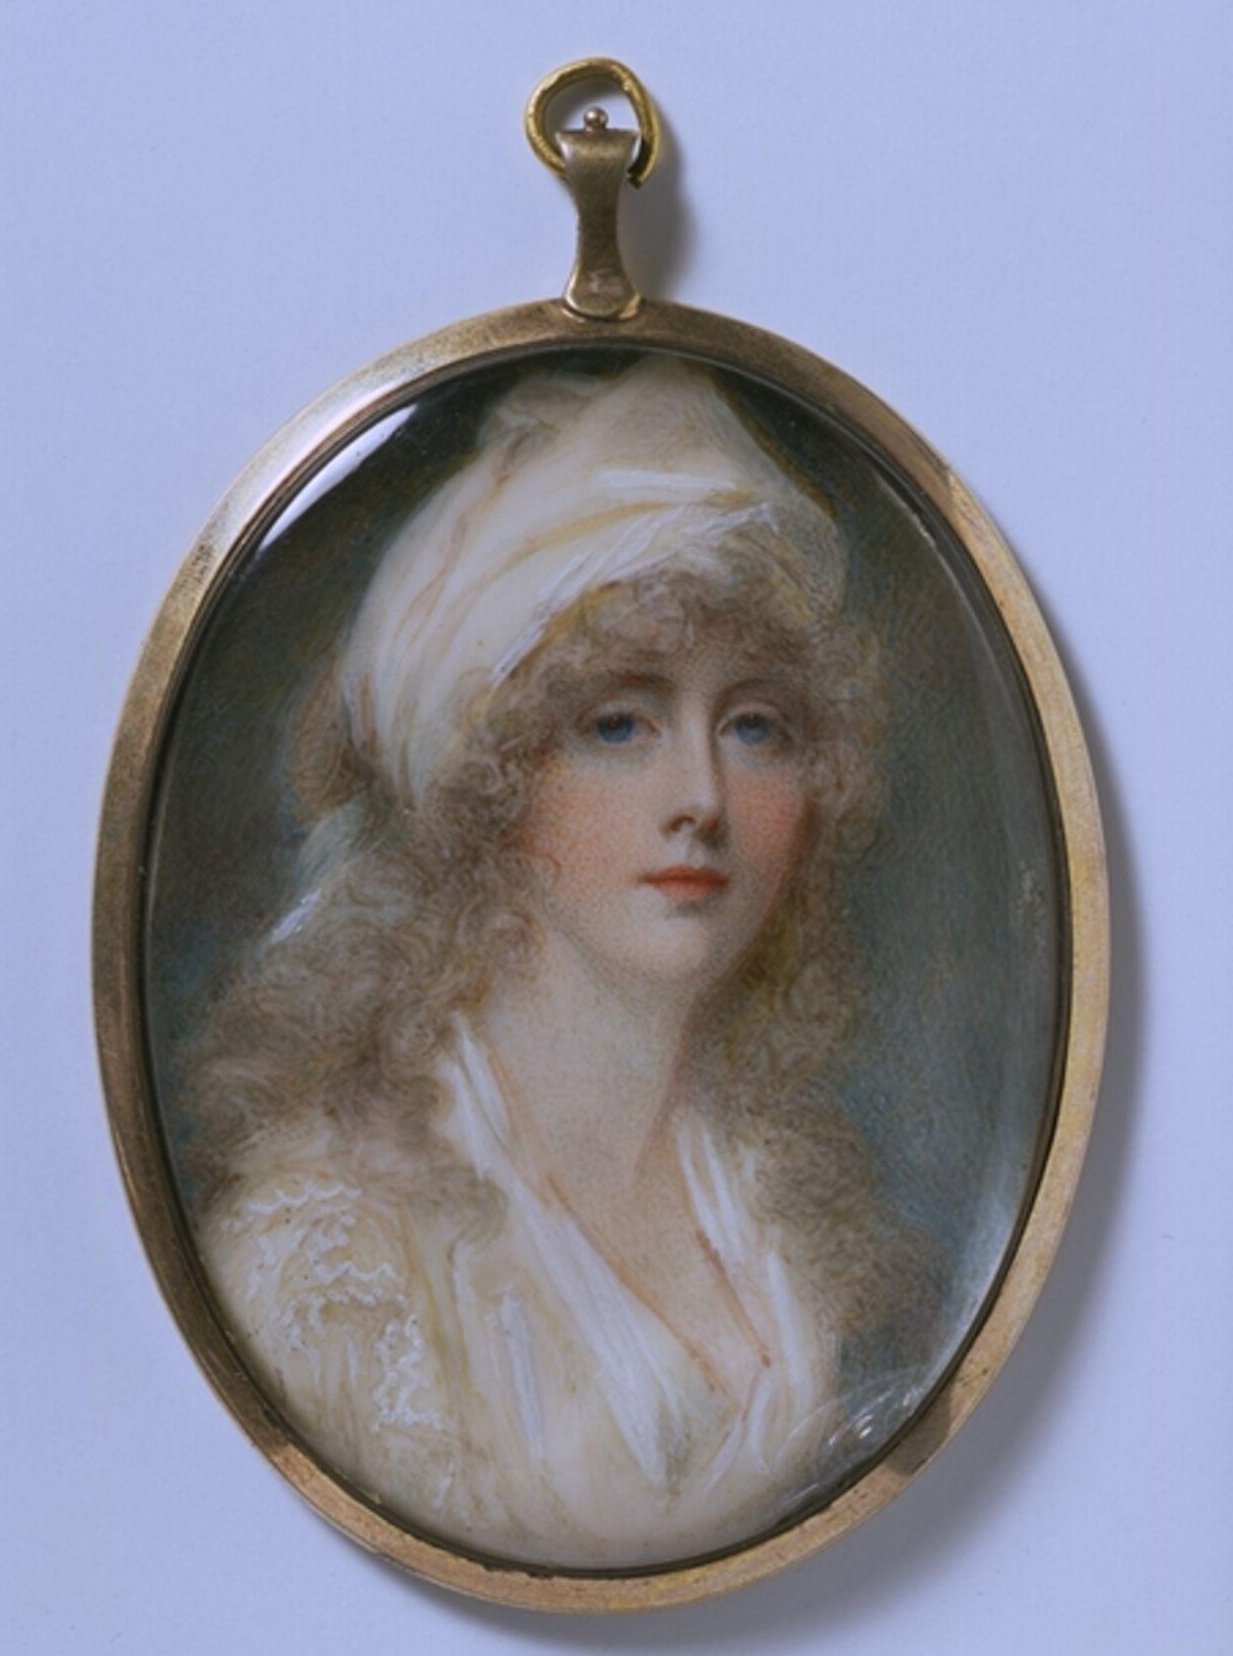 An oval portrait miniature of the artist wearing a white dress with a white scarf tied in her hair. Curls frame her face and fall around her shoulders. She looks out directly at the viewer with a confident, neutral expression. She has intense blue eyes and coral cheeks and lips.